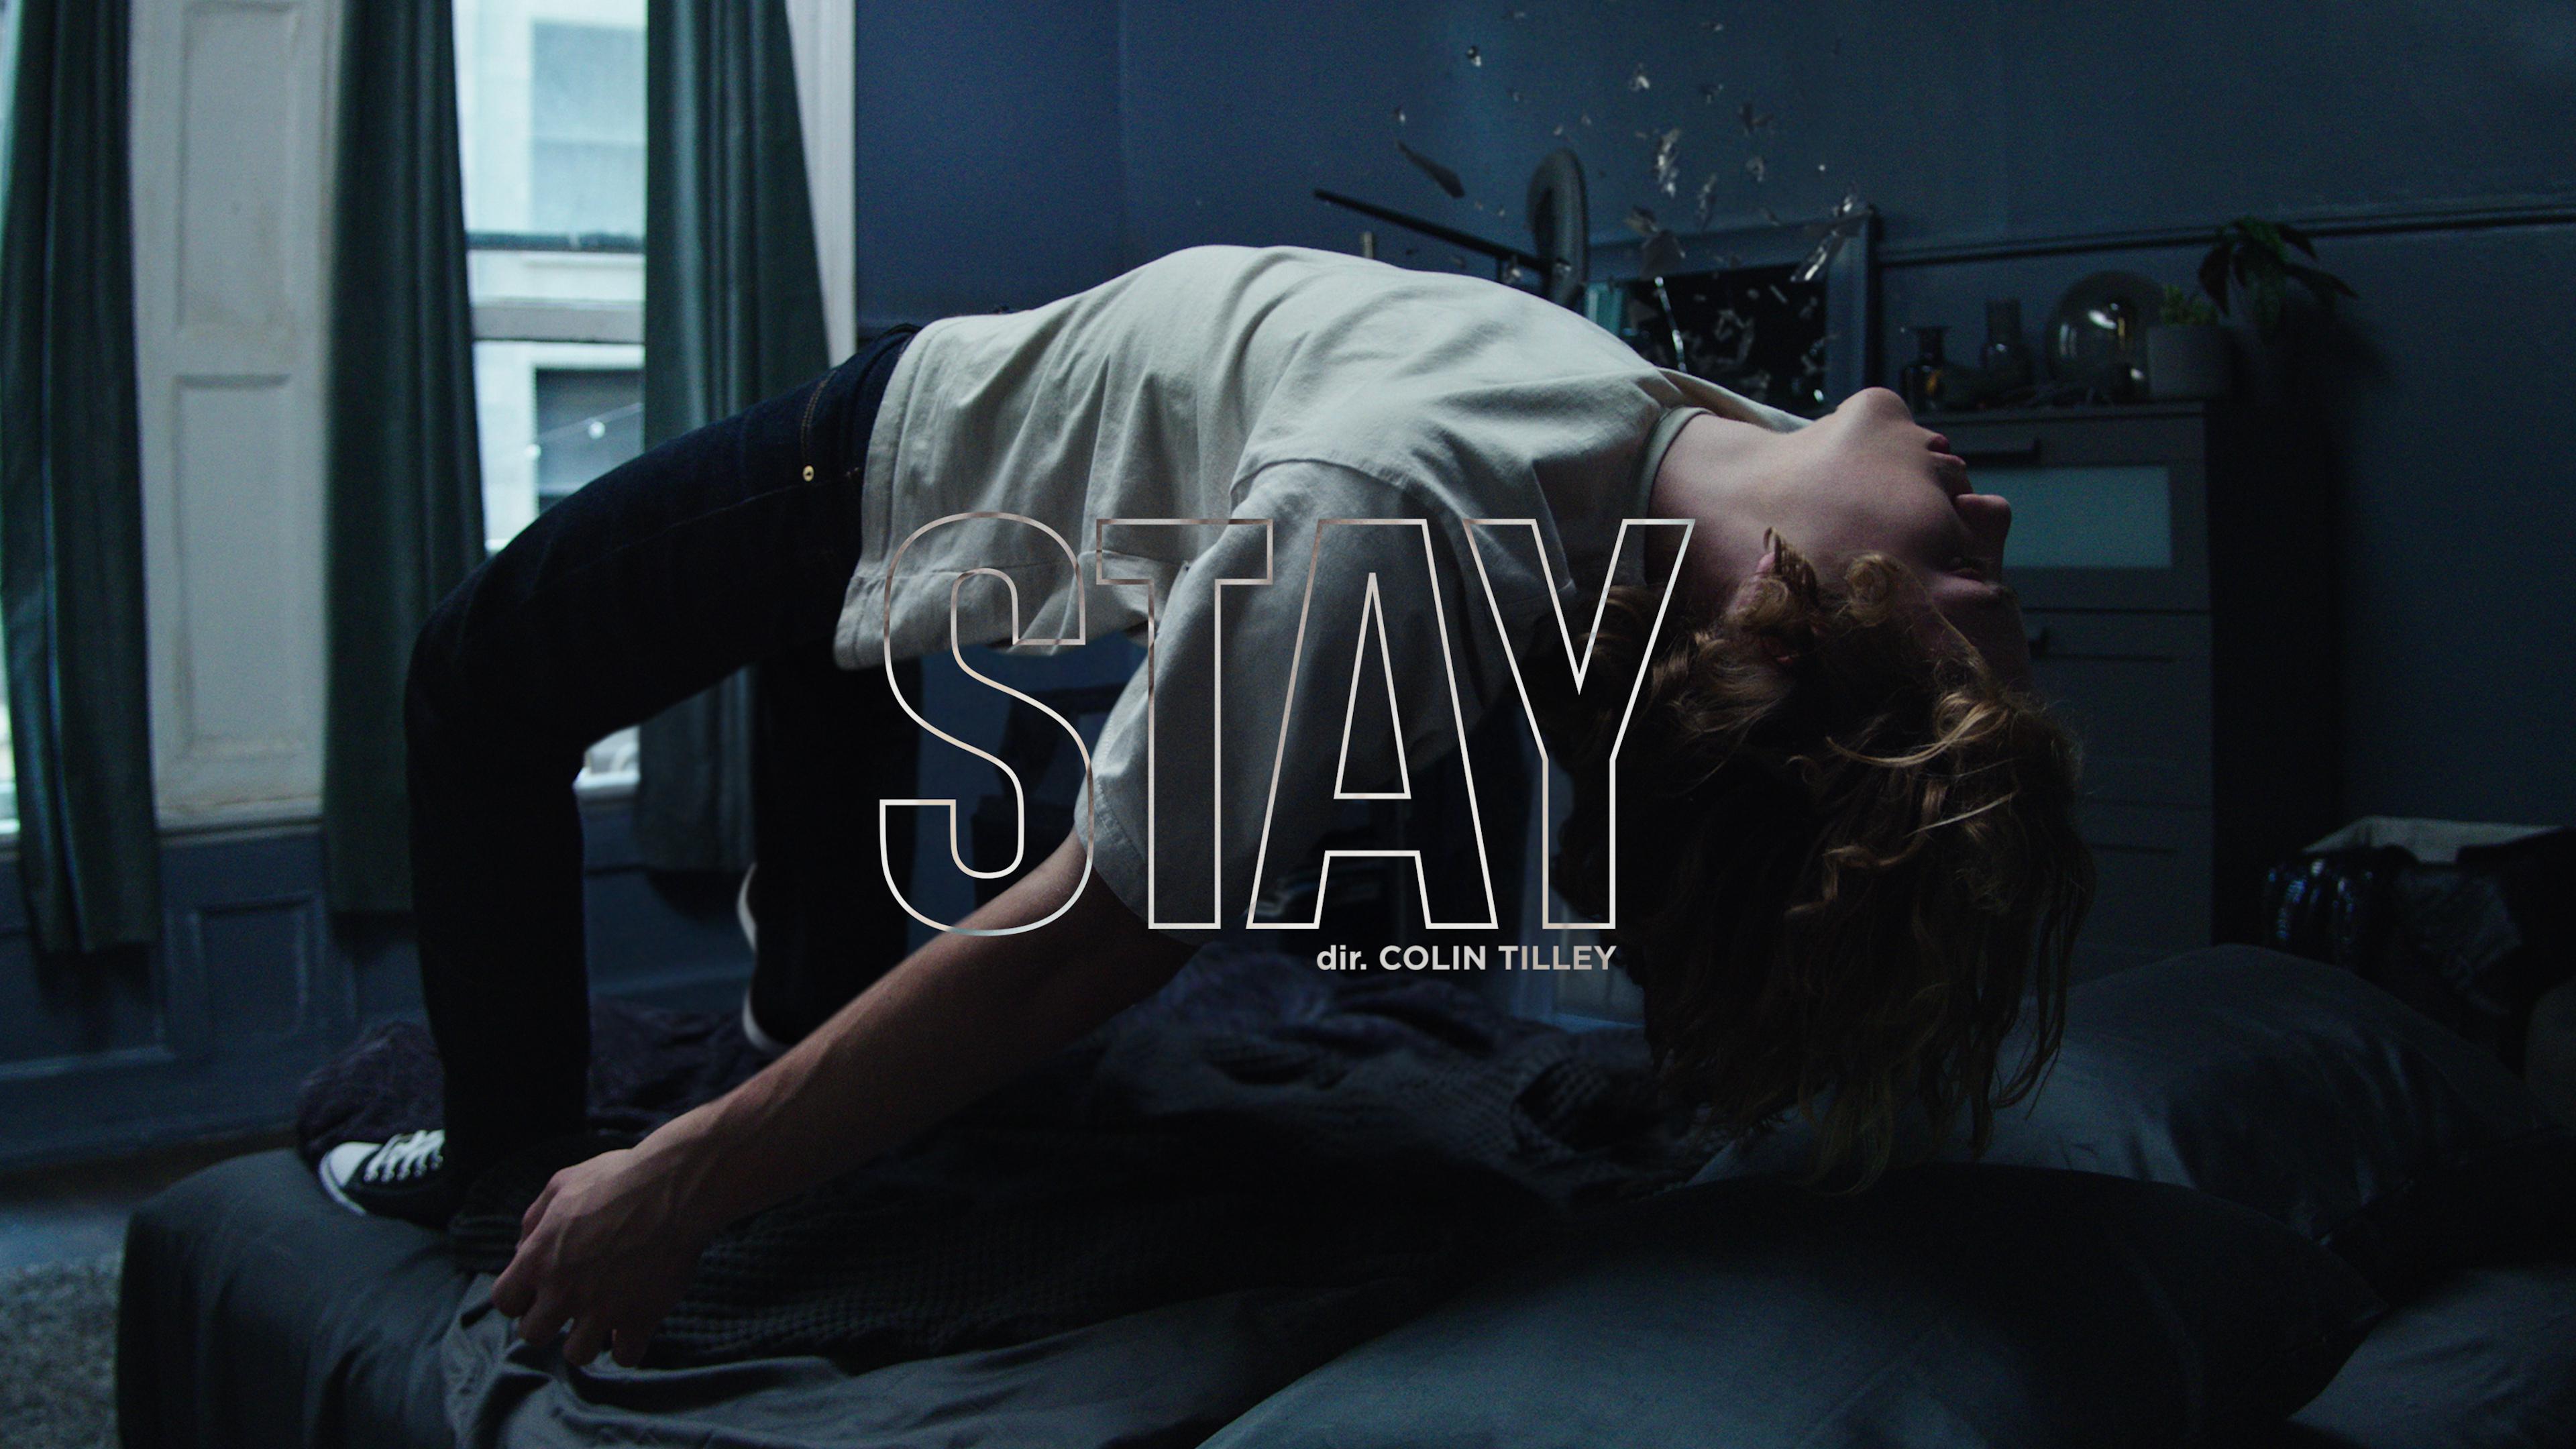 The Kid LAROI - STAY (Official Video)